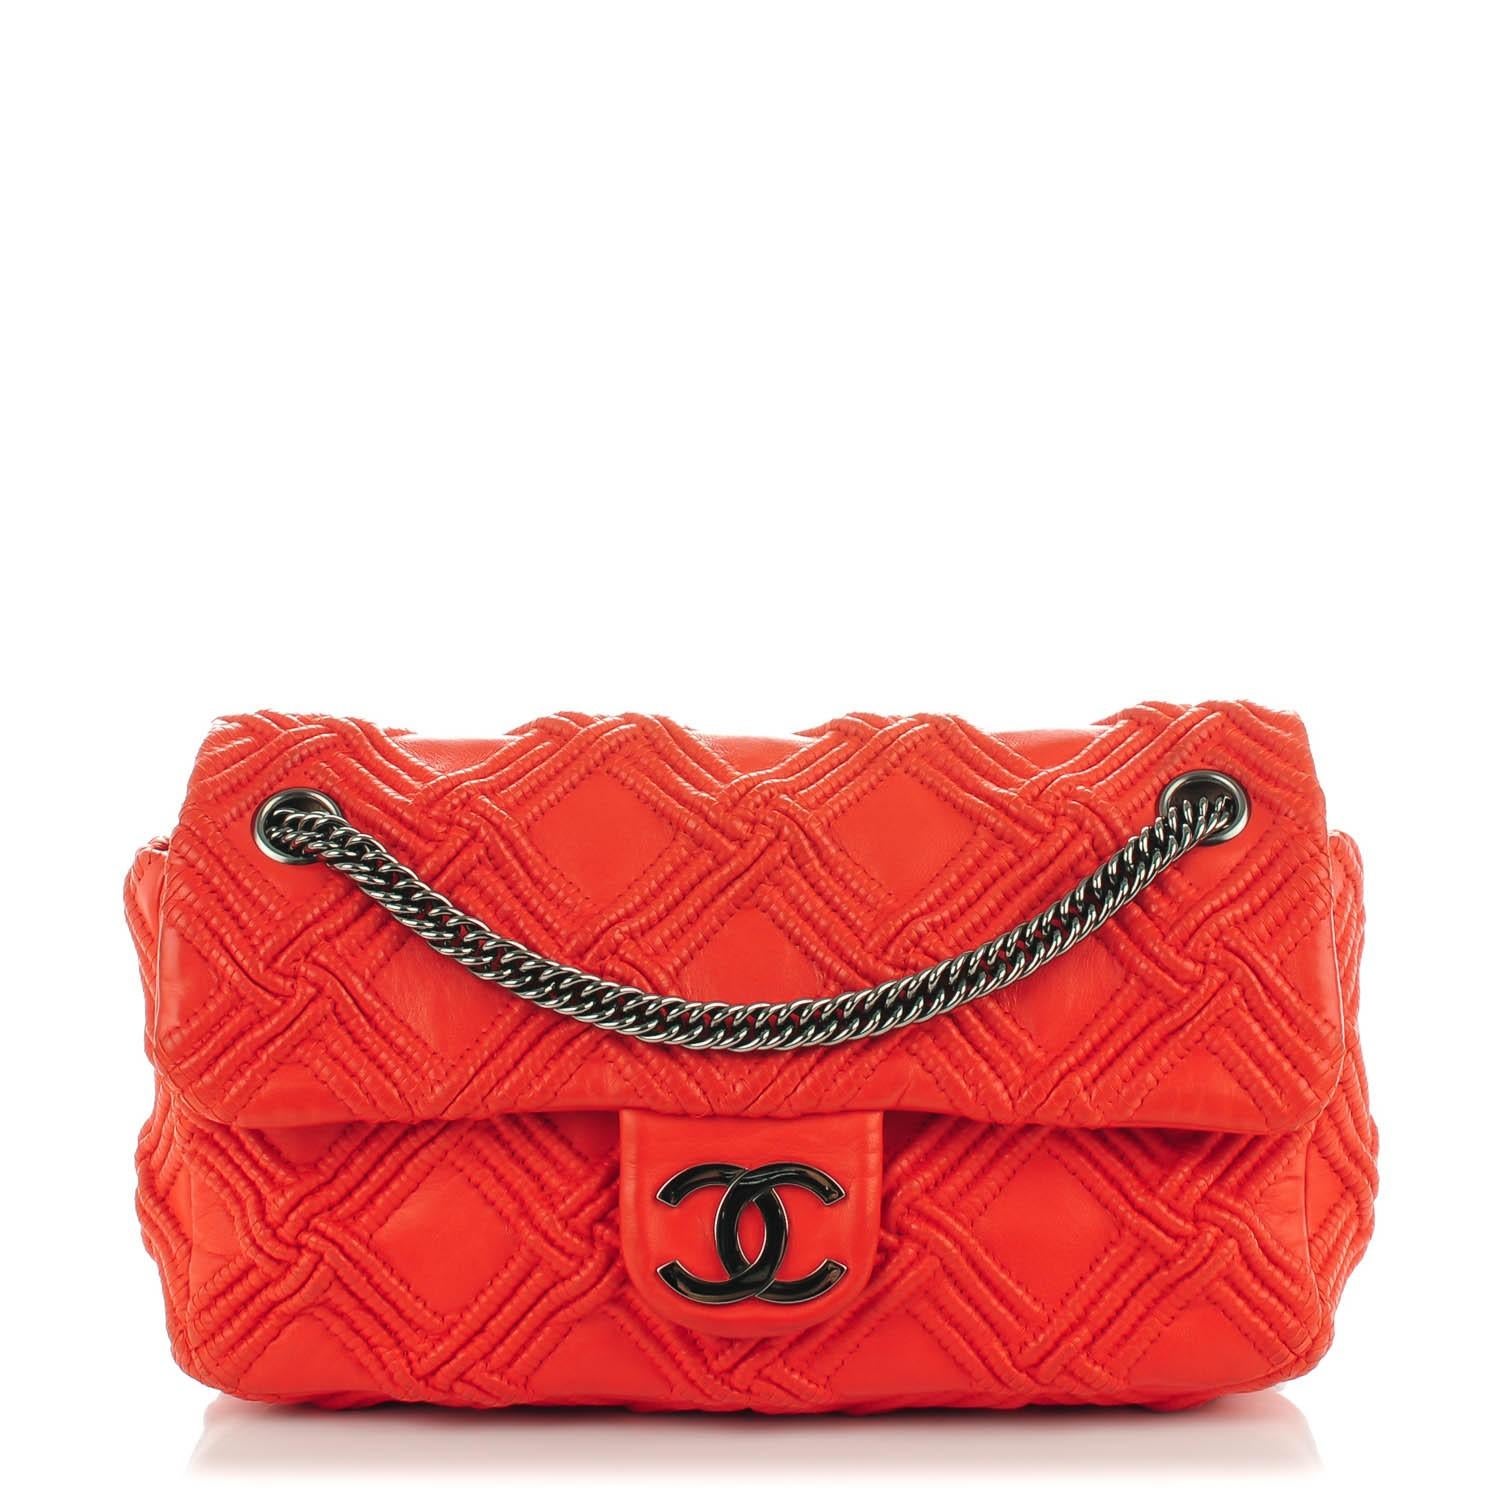 Chanel 2006 Rare Neon Red Coral Soft Lambskin Stitched Medium Classic Flap Bag For Sale 1